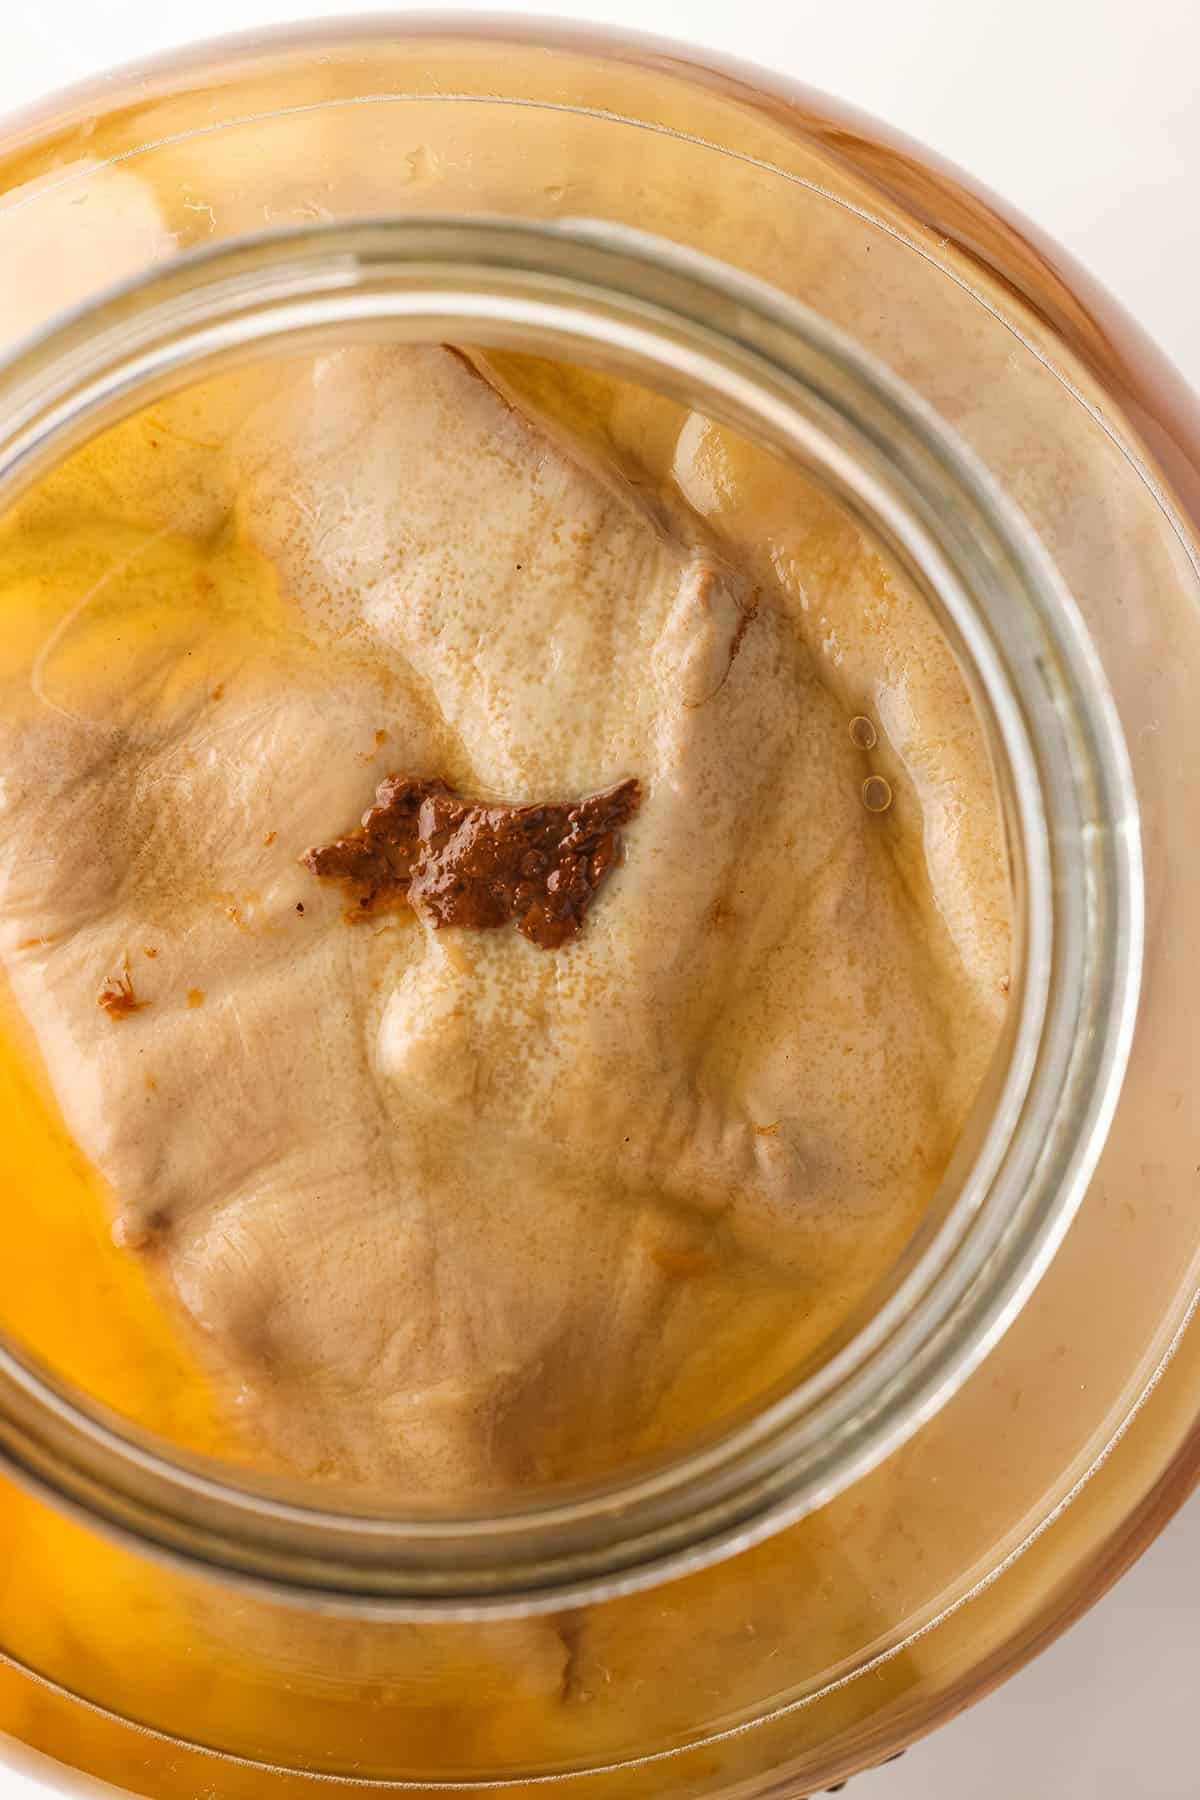 Top view of a wide mouth gallon jar, showing a new SCOBY floating at the top. 